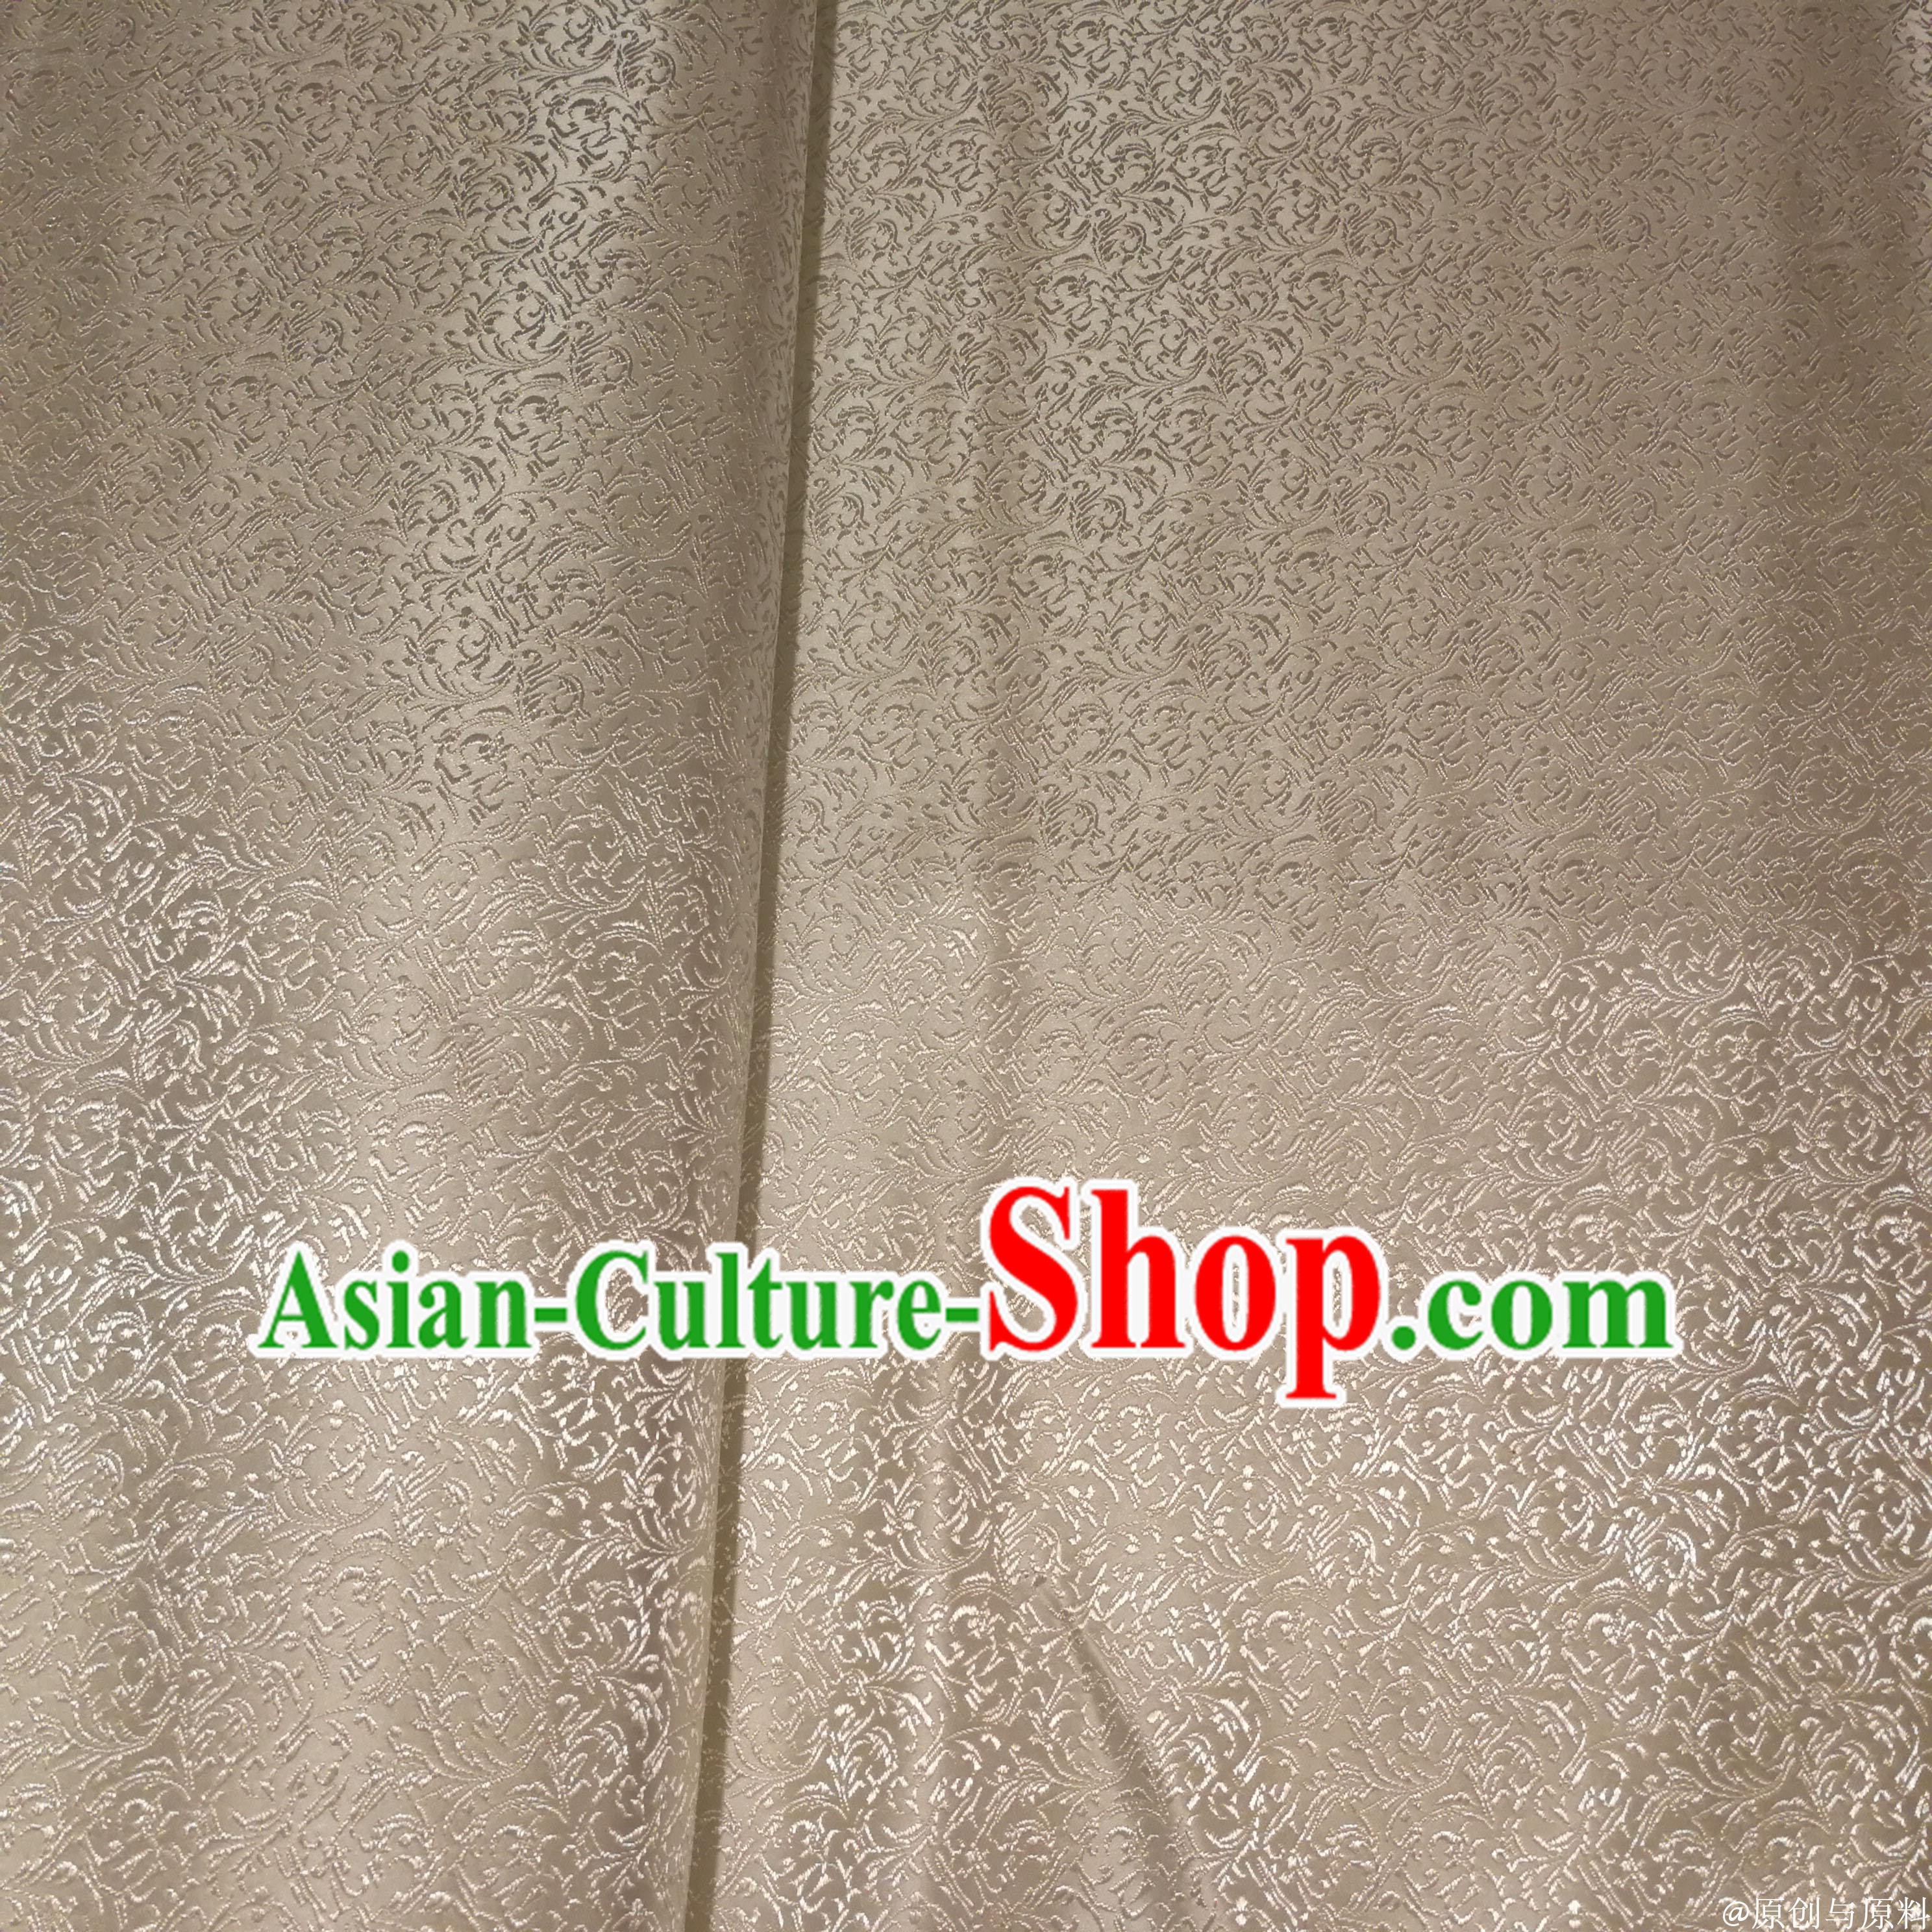 White Color Chinese Royal Palace Style Traditional Pattern Flower Design Brocade Fabric Silk Fabric Chinese Fabric Asian Material